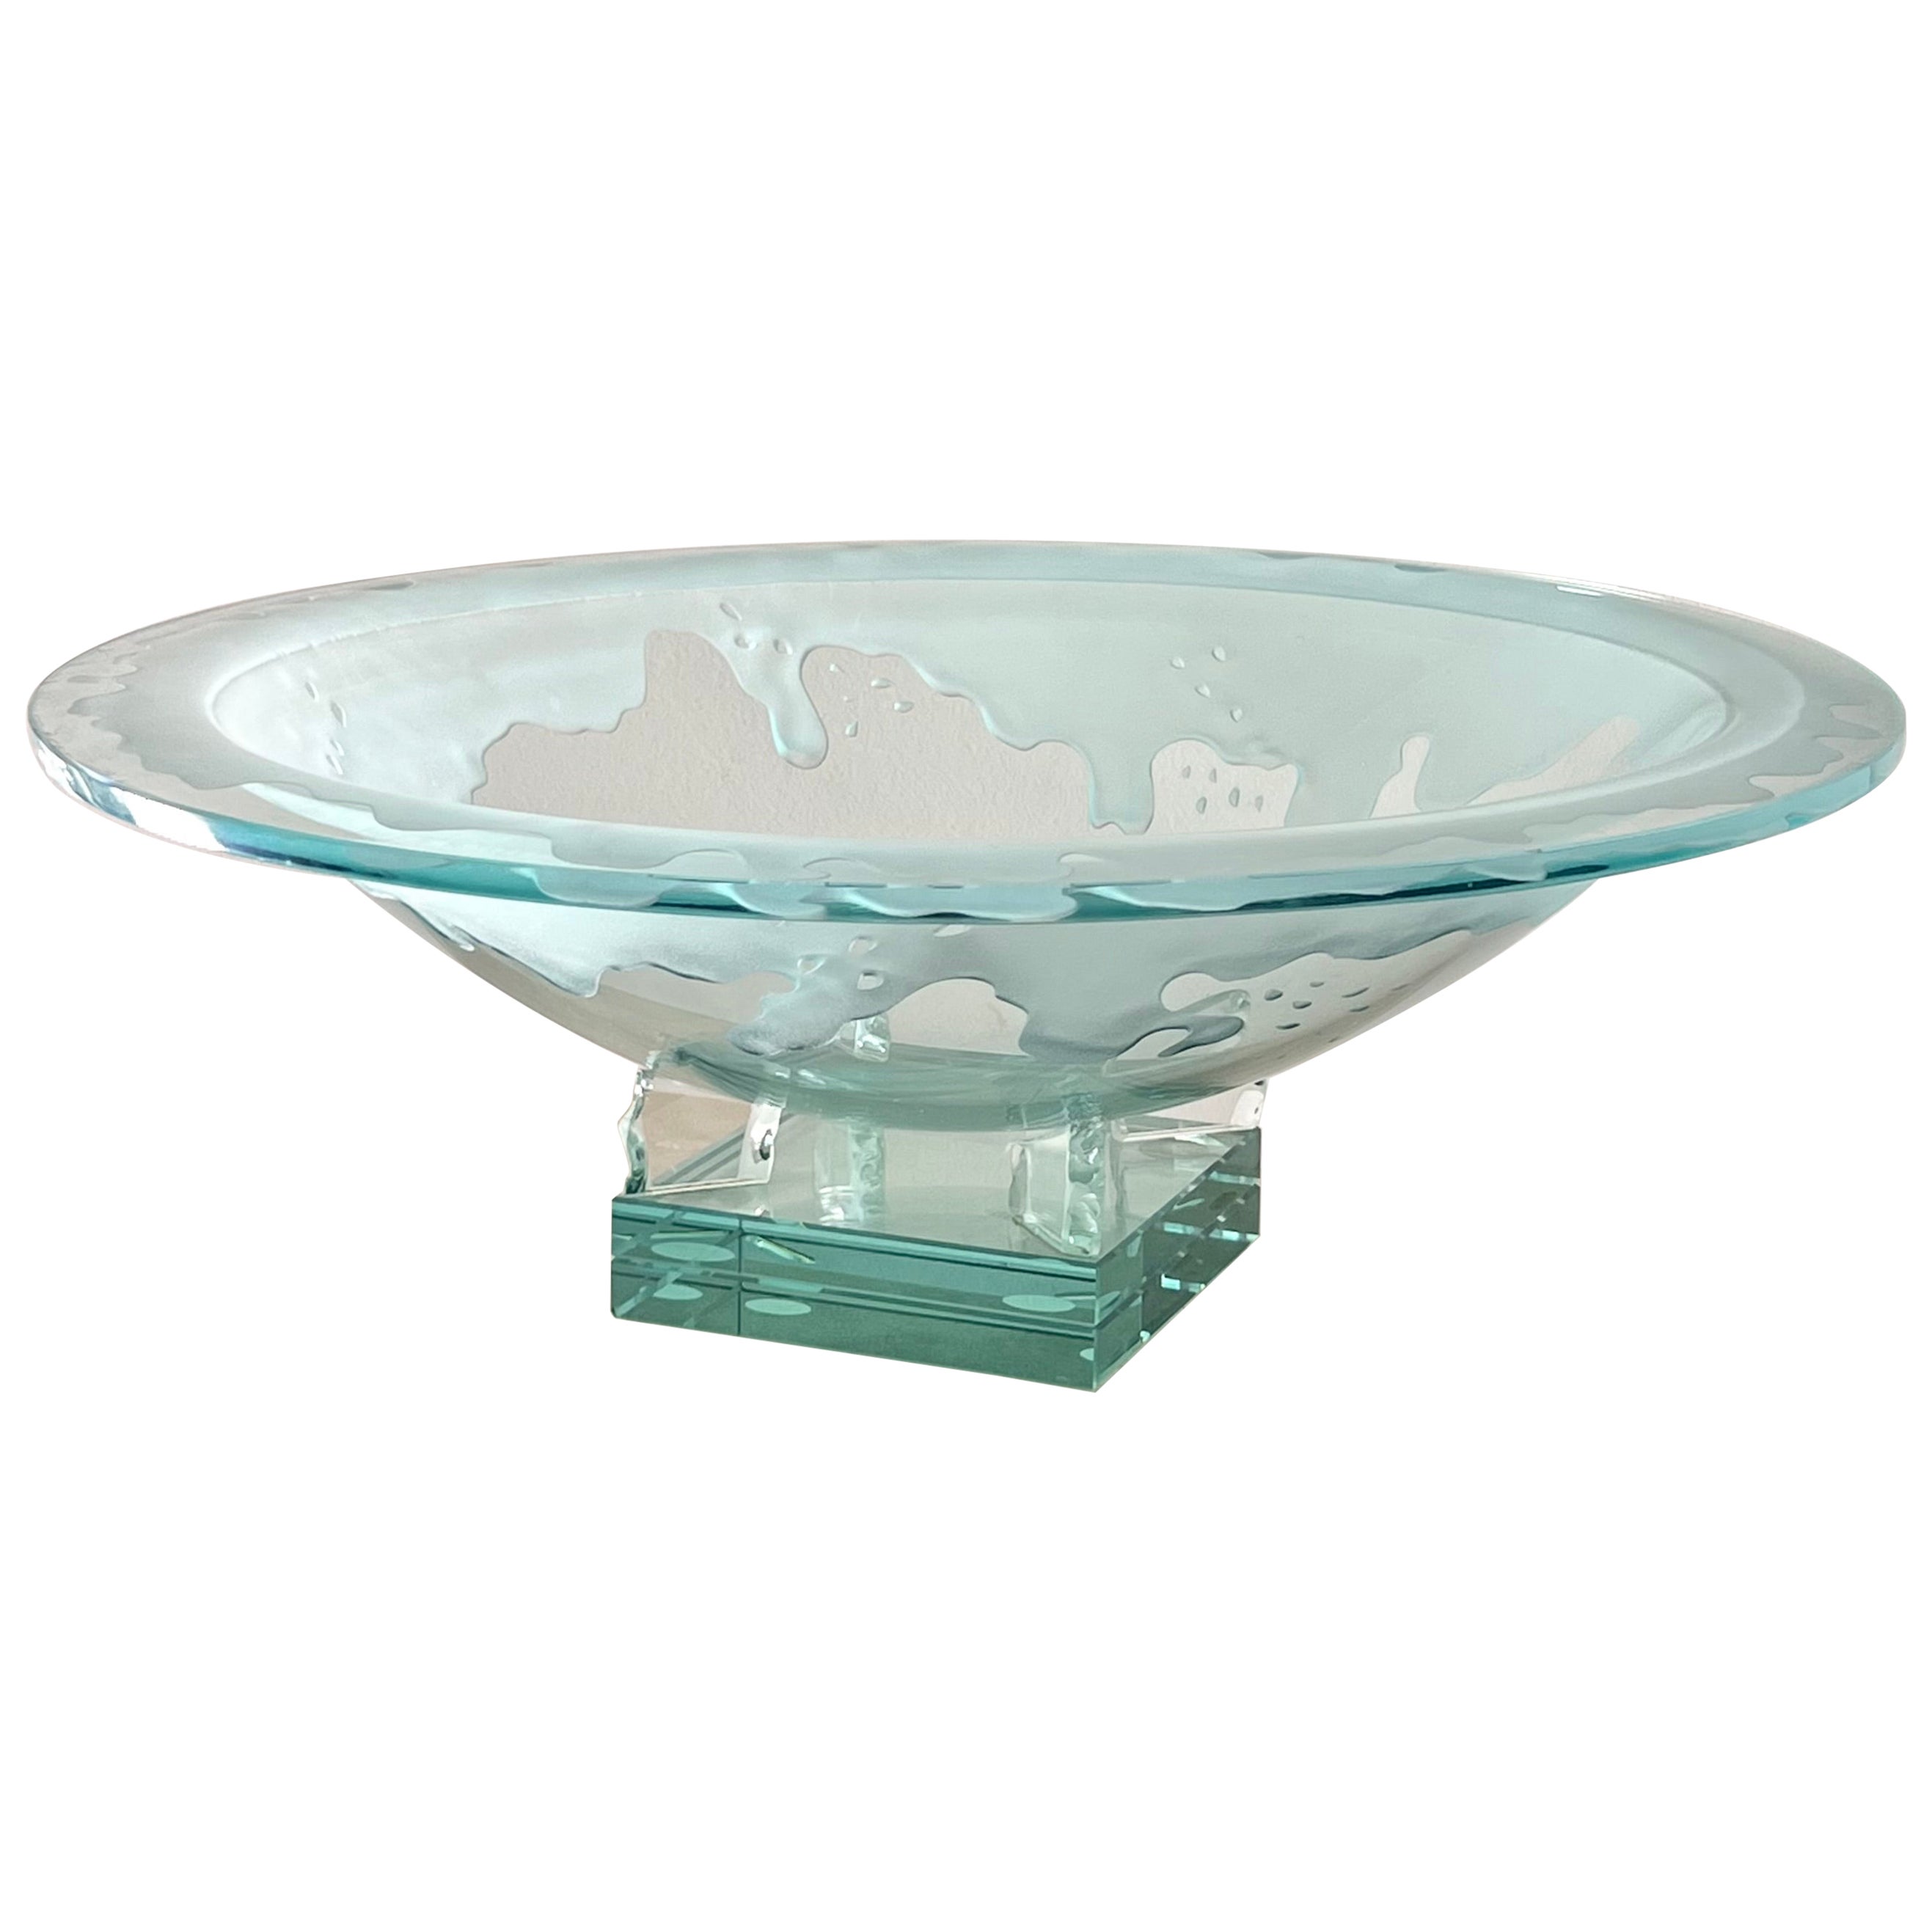 Monumental art glass platter with frosted motif, on plinth, late 20th century